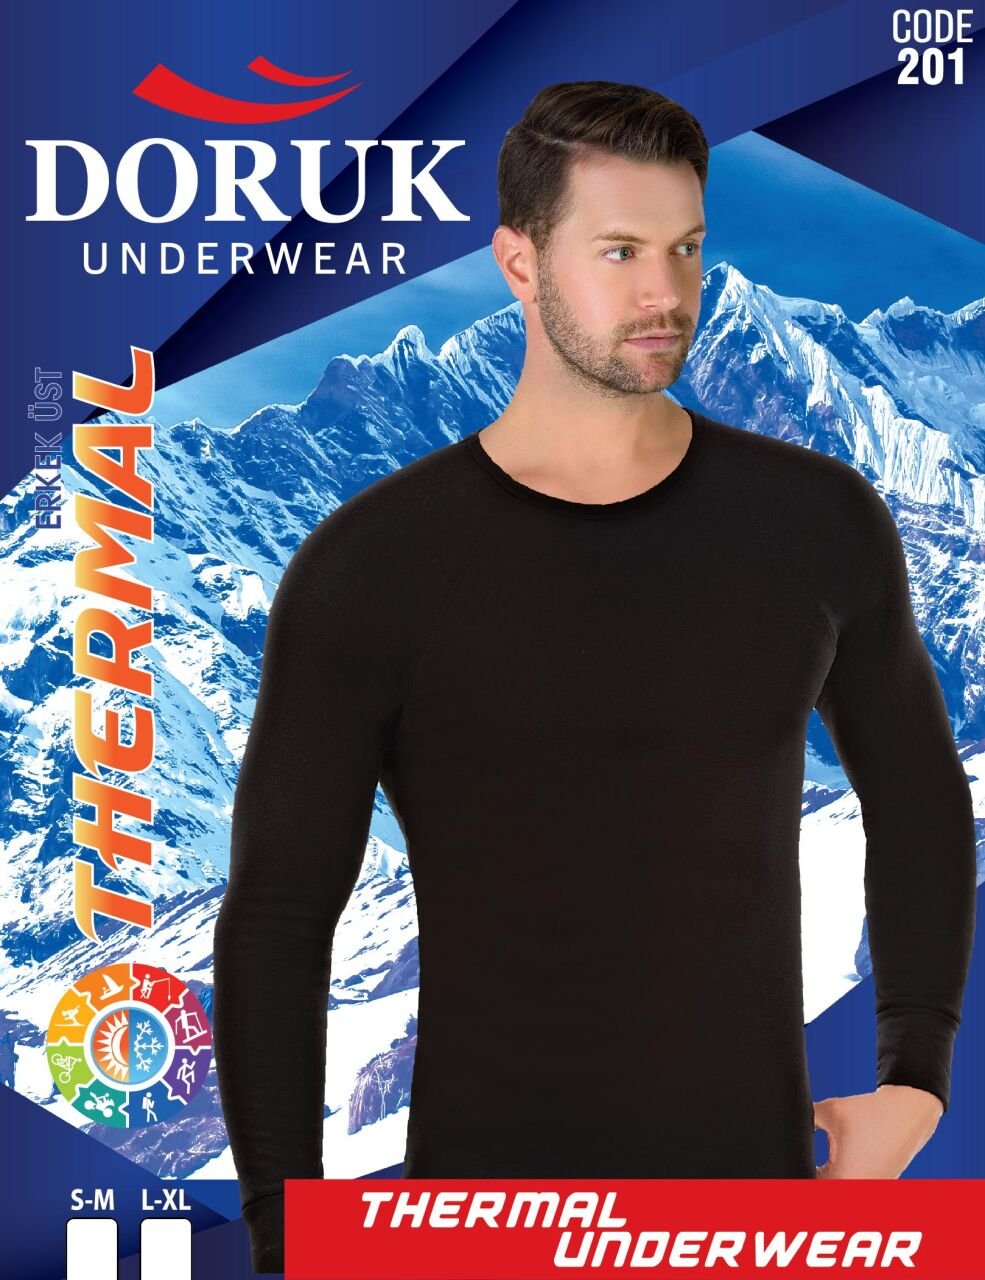 Thermal Underwear (Thermal undershirt and Thermal tights)